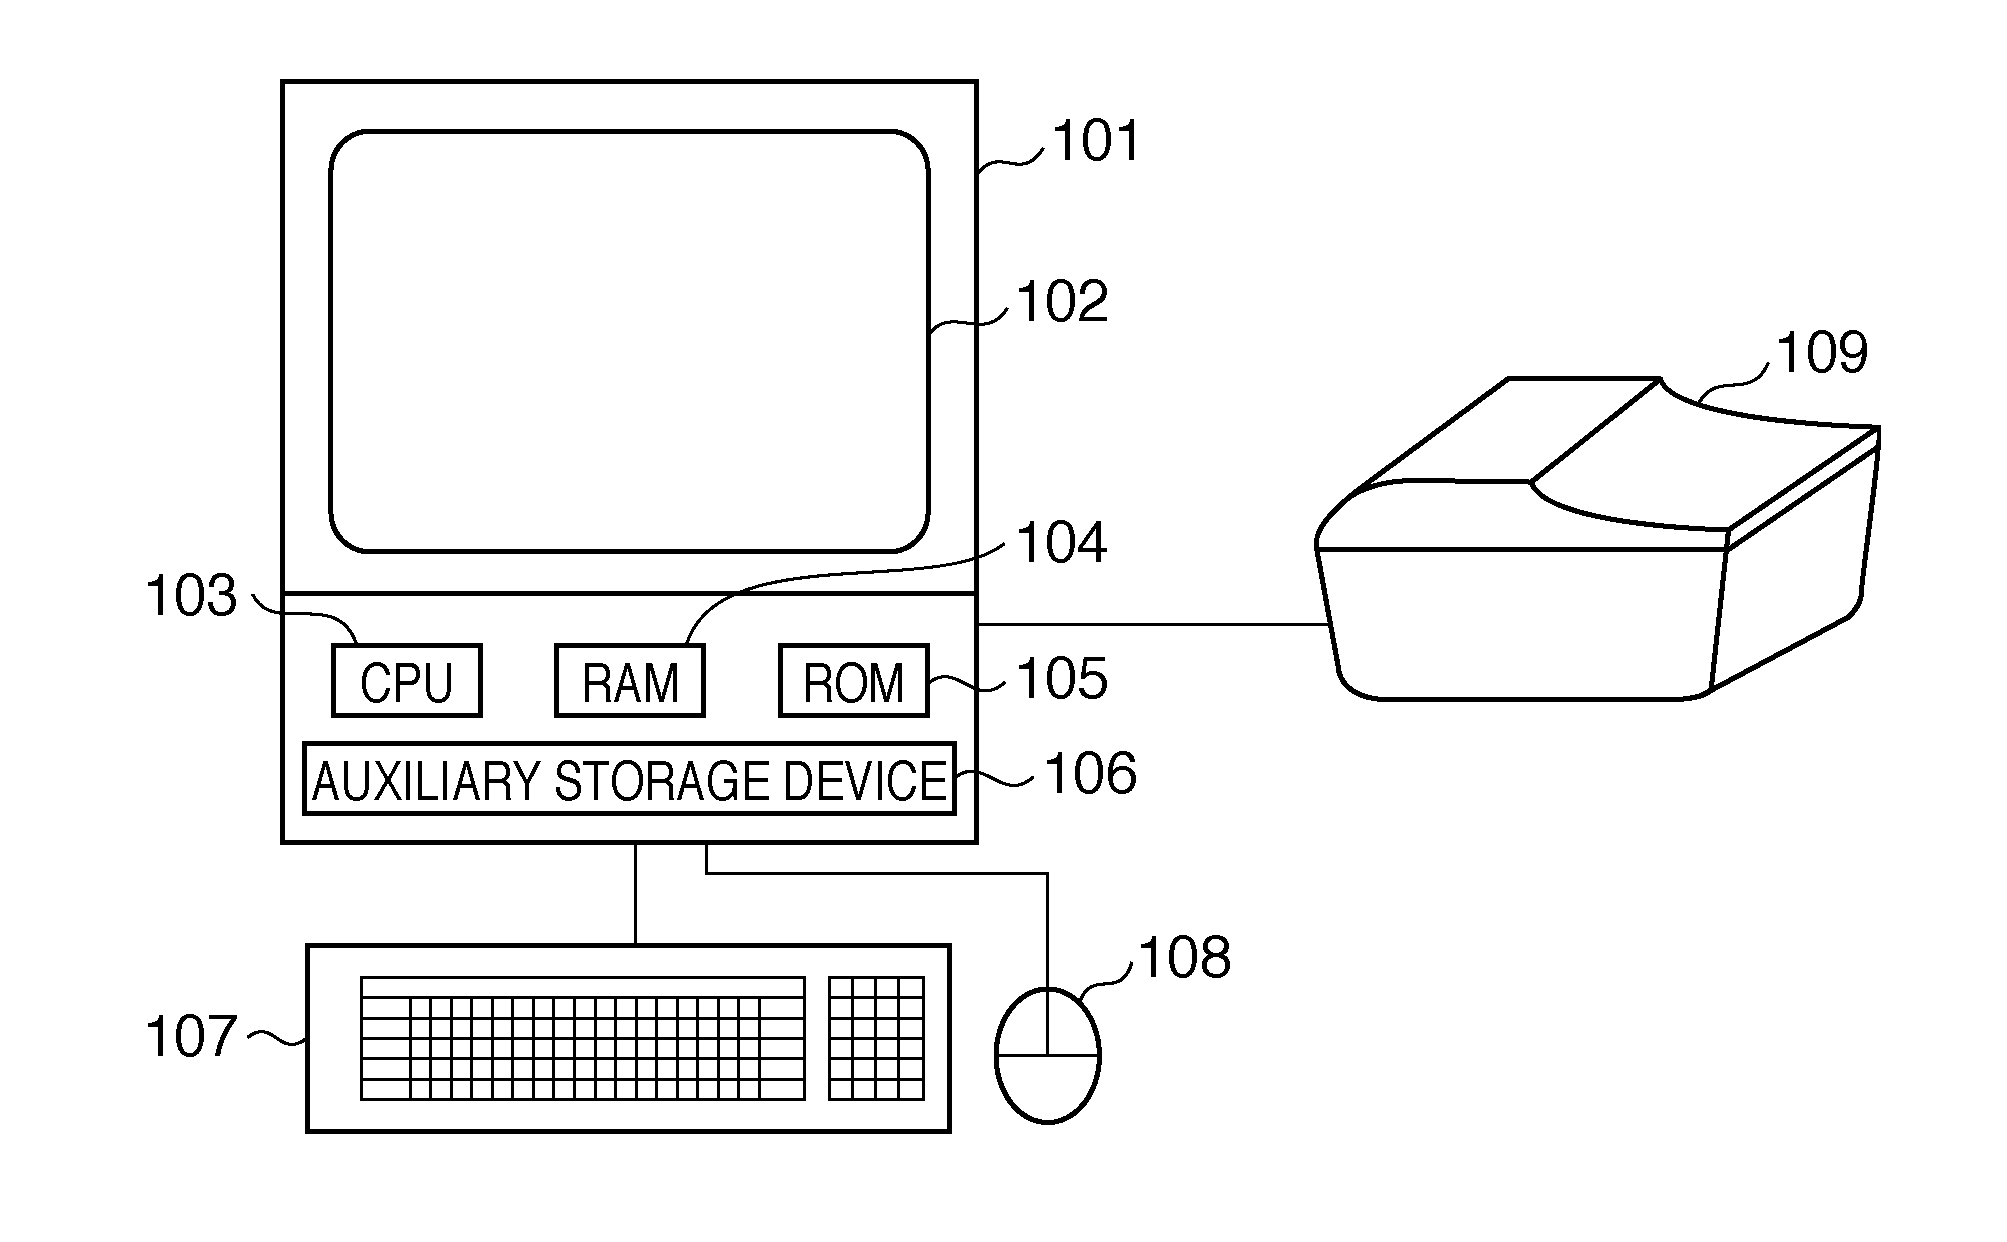 Image reading method, image reading system, and image reading apparatus